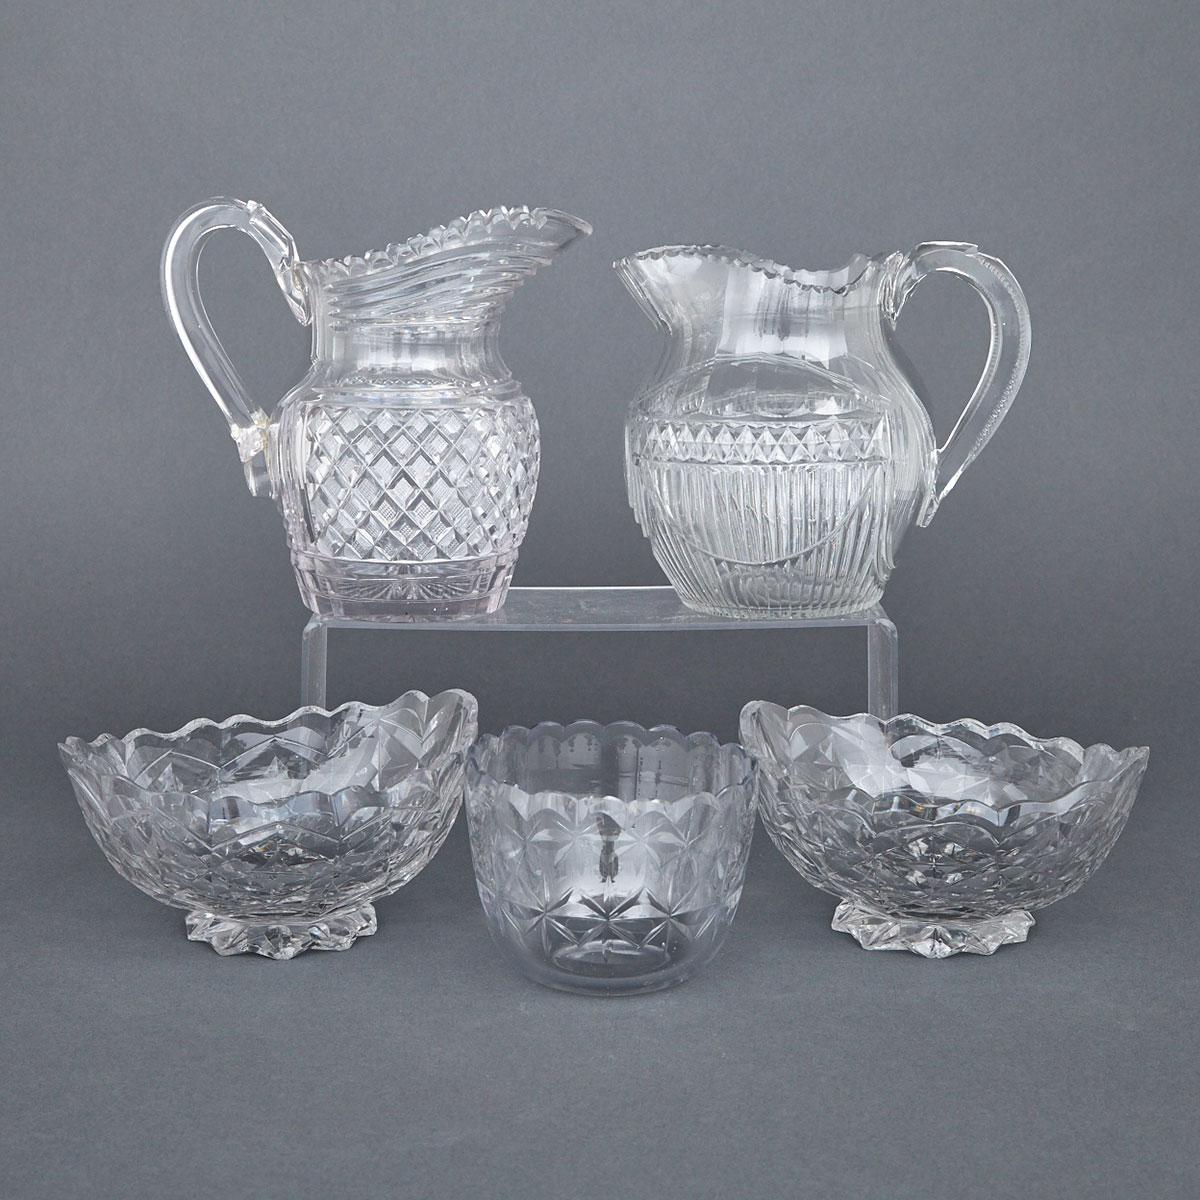 Two Anglo-Irish Cut Glass Water Jugs, Pair of Oval Bowls and a Blending Bowl, late 18th/early 19th century